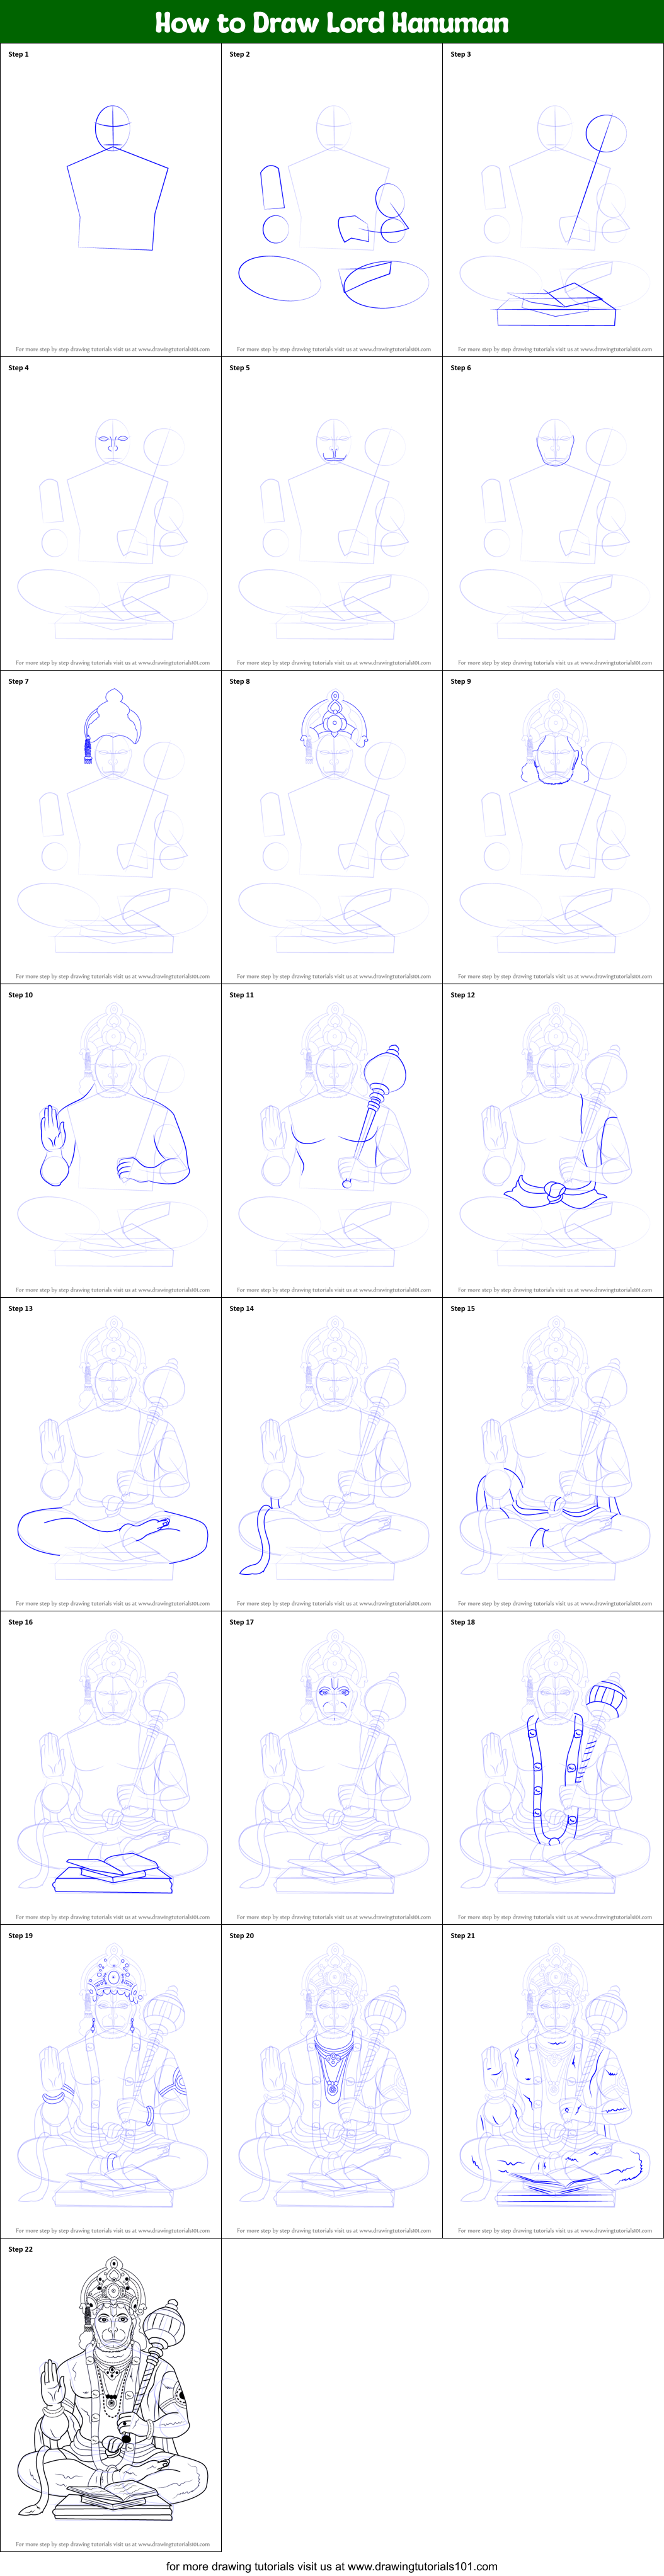 How to Draw Lord Hanuman printable step by step drawing sheet 